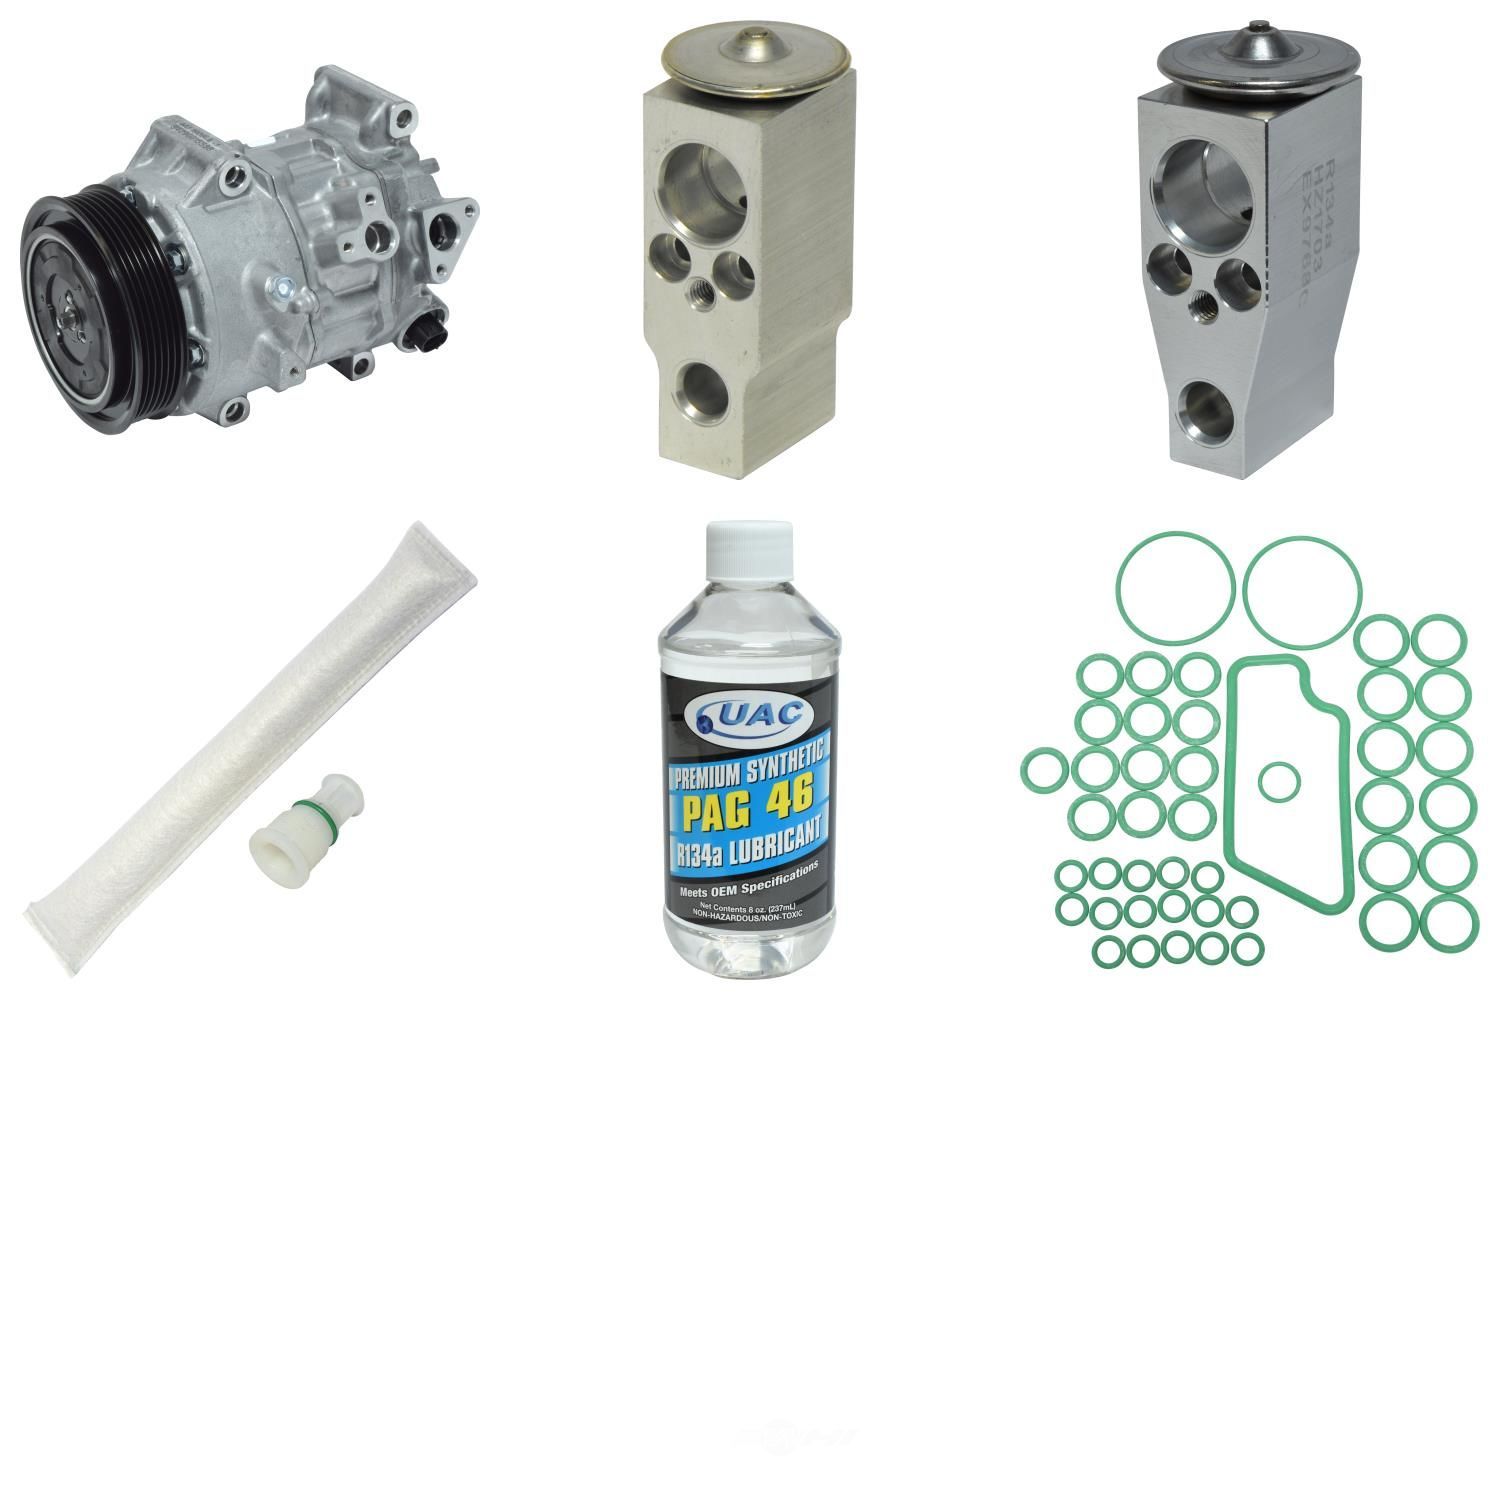 UNIVERSAL AIR CONDITIONER, INC. - Compressor Replacement Kit - UAC KT 5559